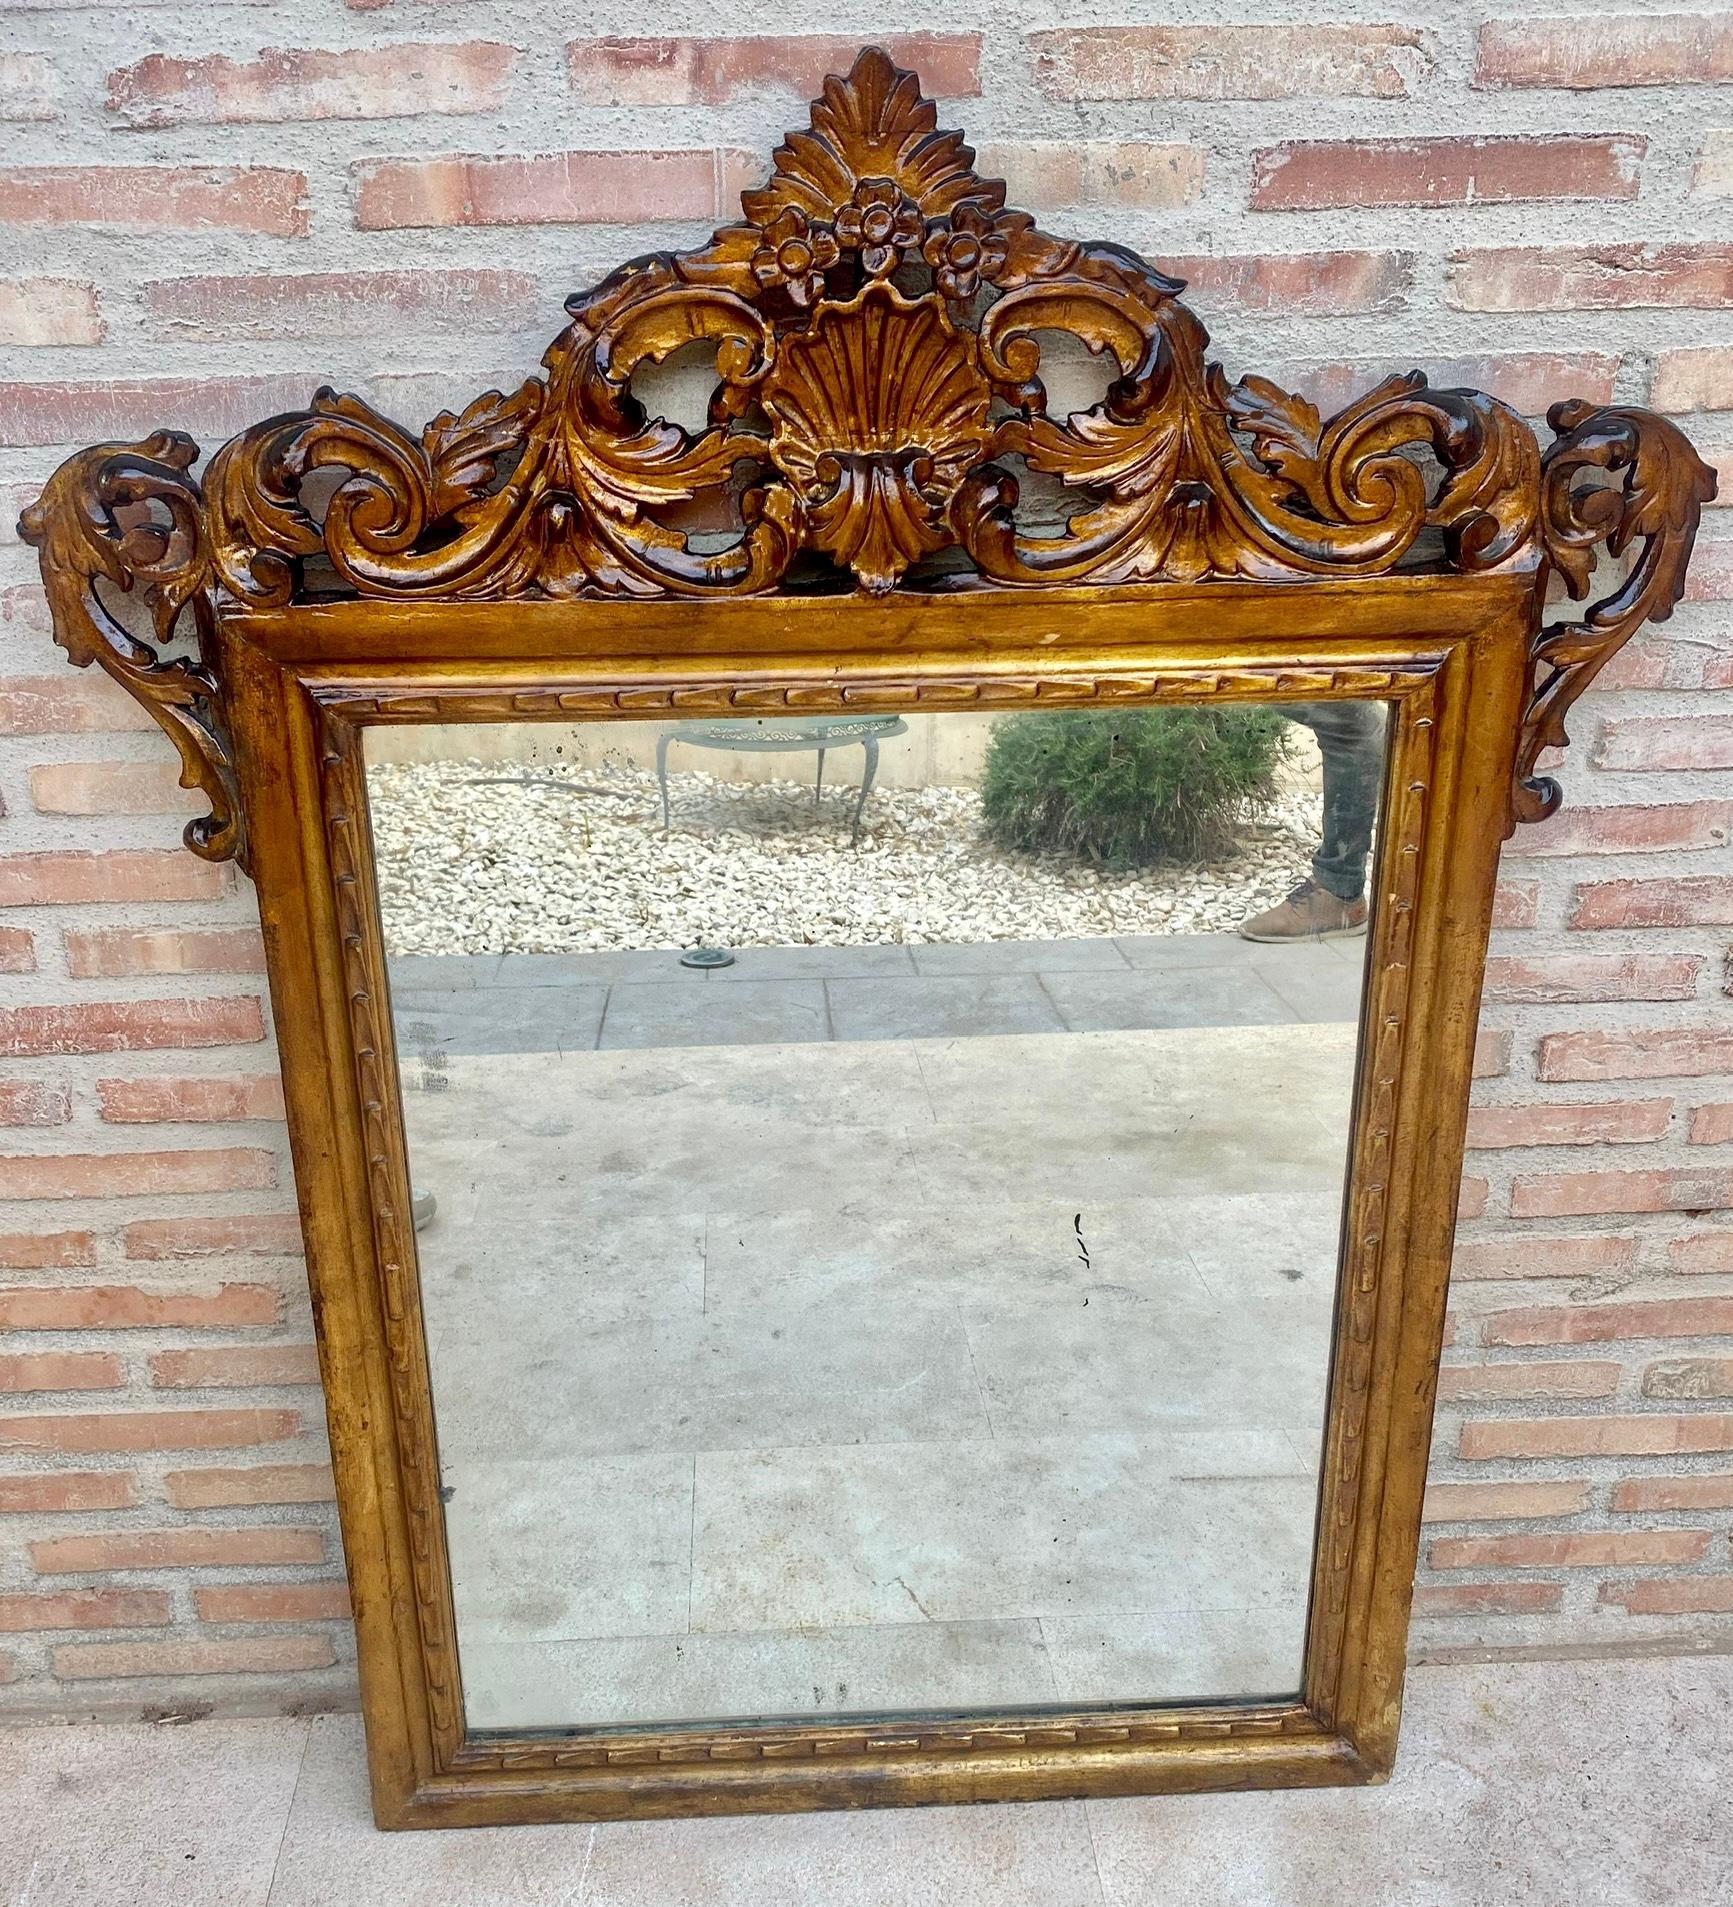 Early 20Th Century French Wood Wall Mirror.Antique French Hand Made Folk Art Gilt Mirror 1920